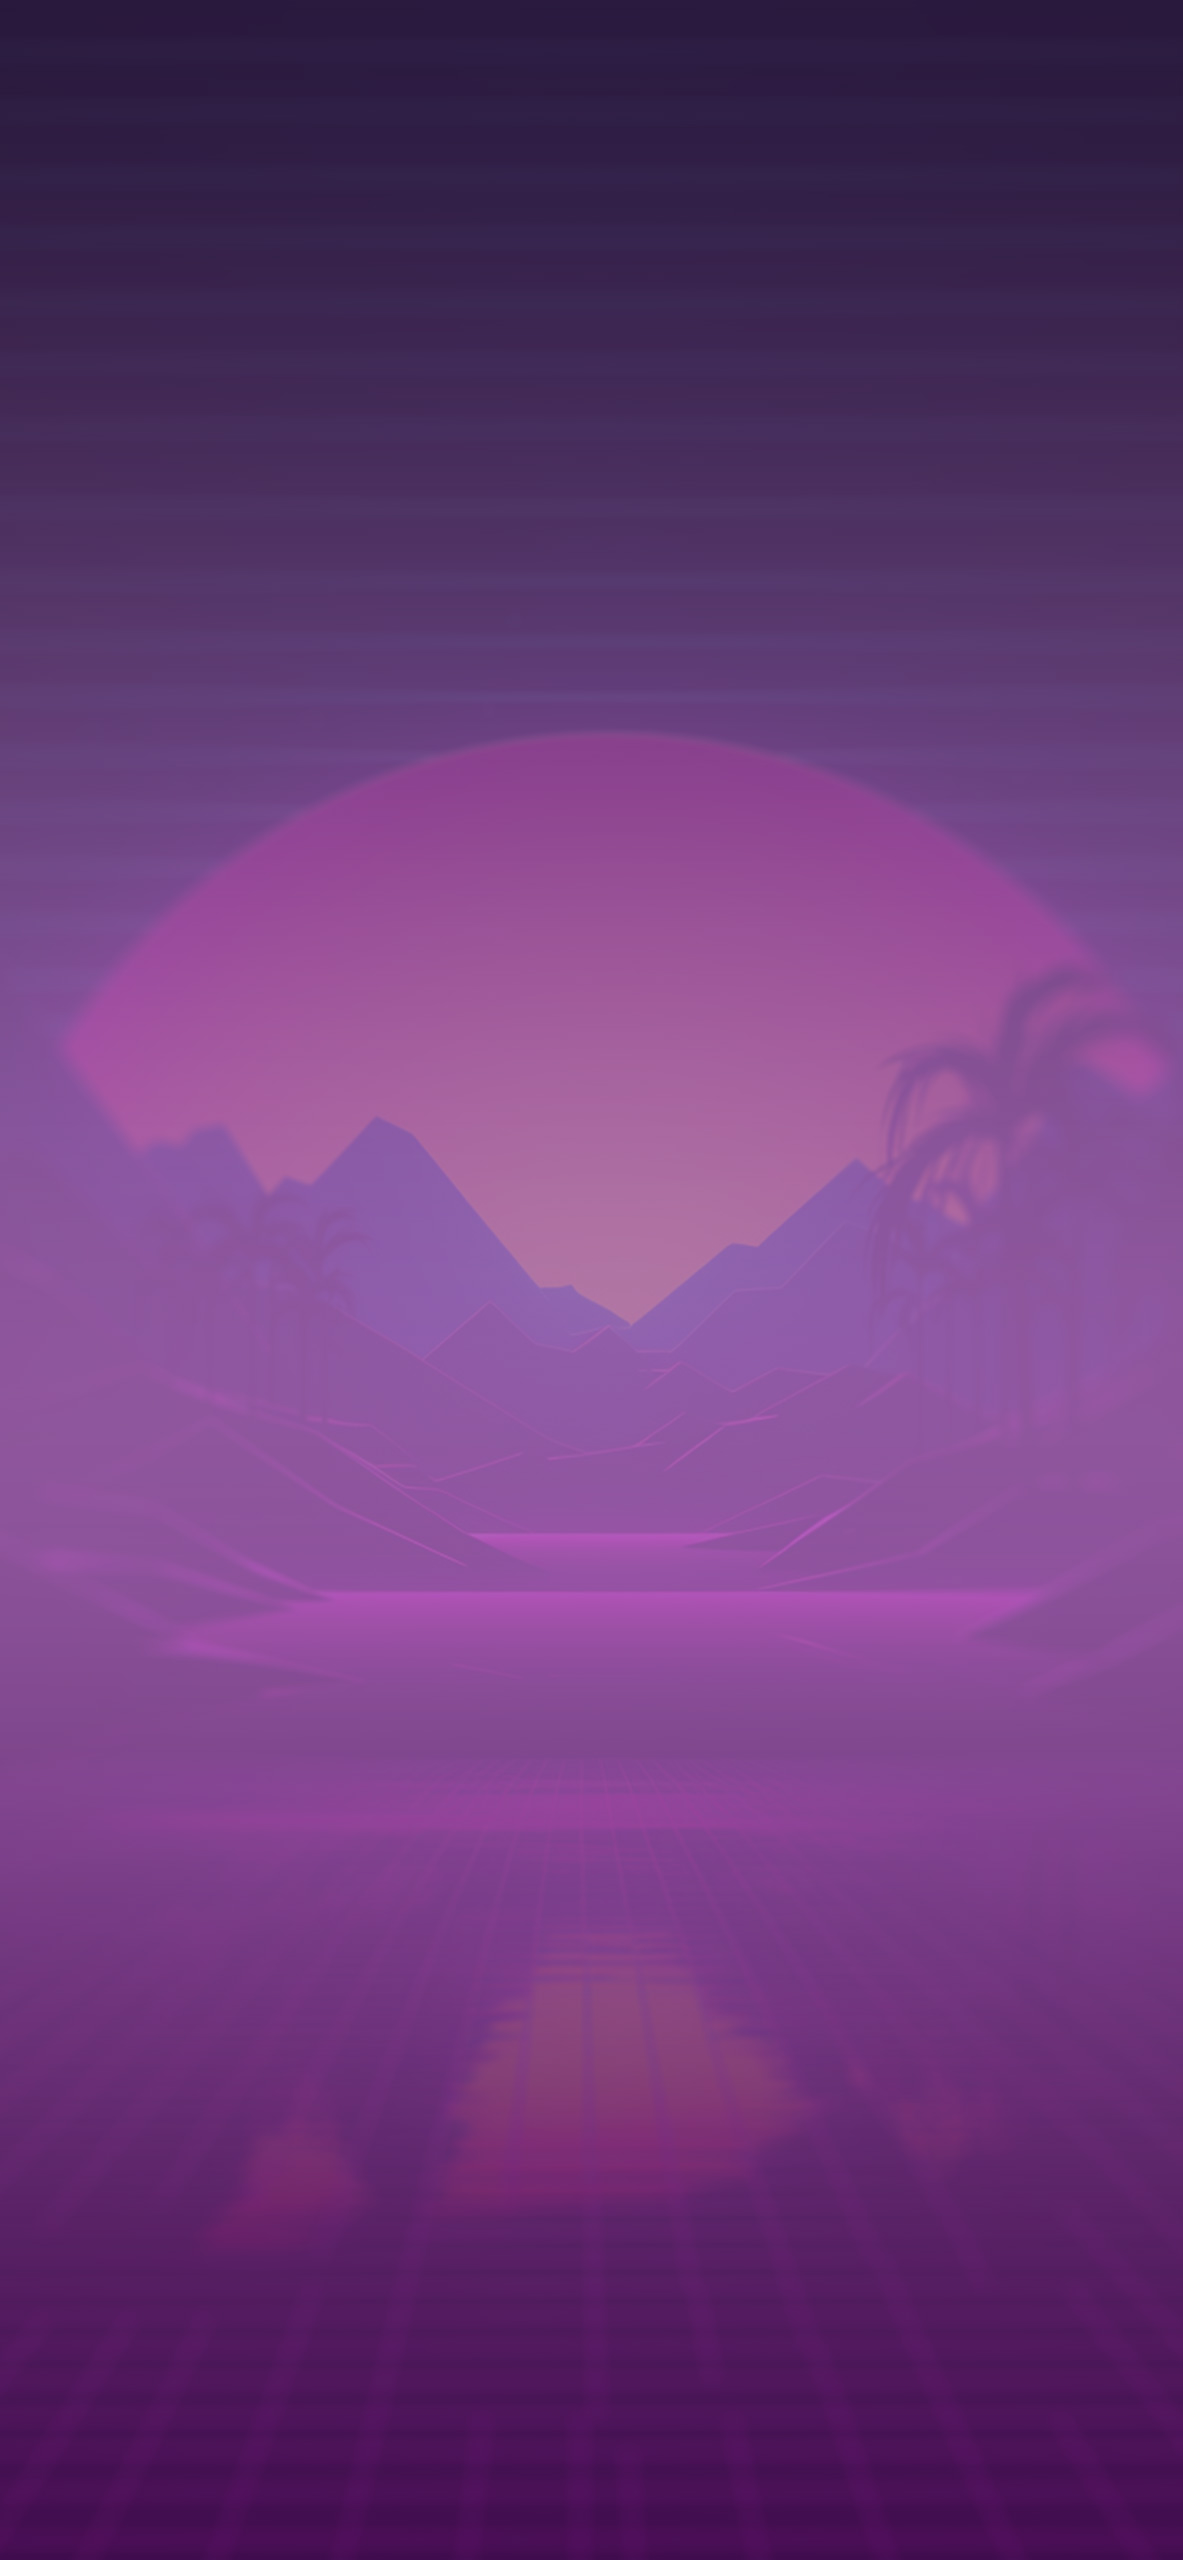 synthwave mountain sunset background